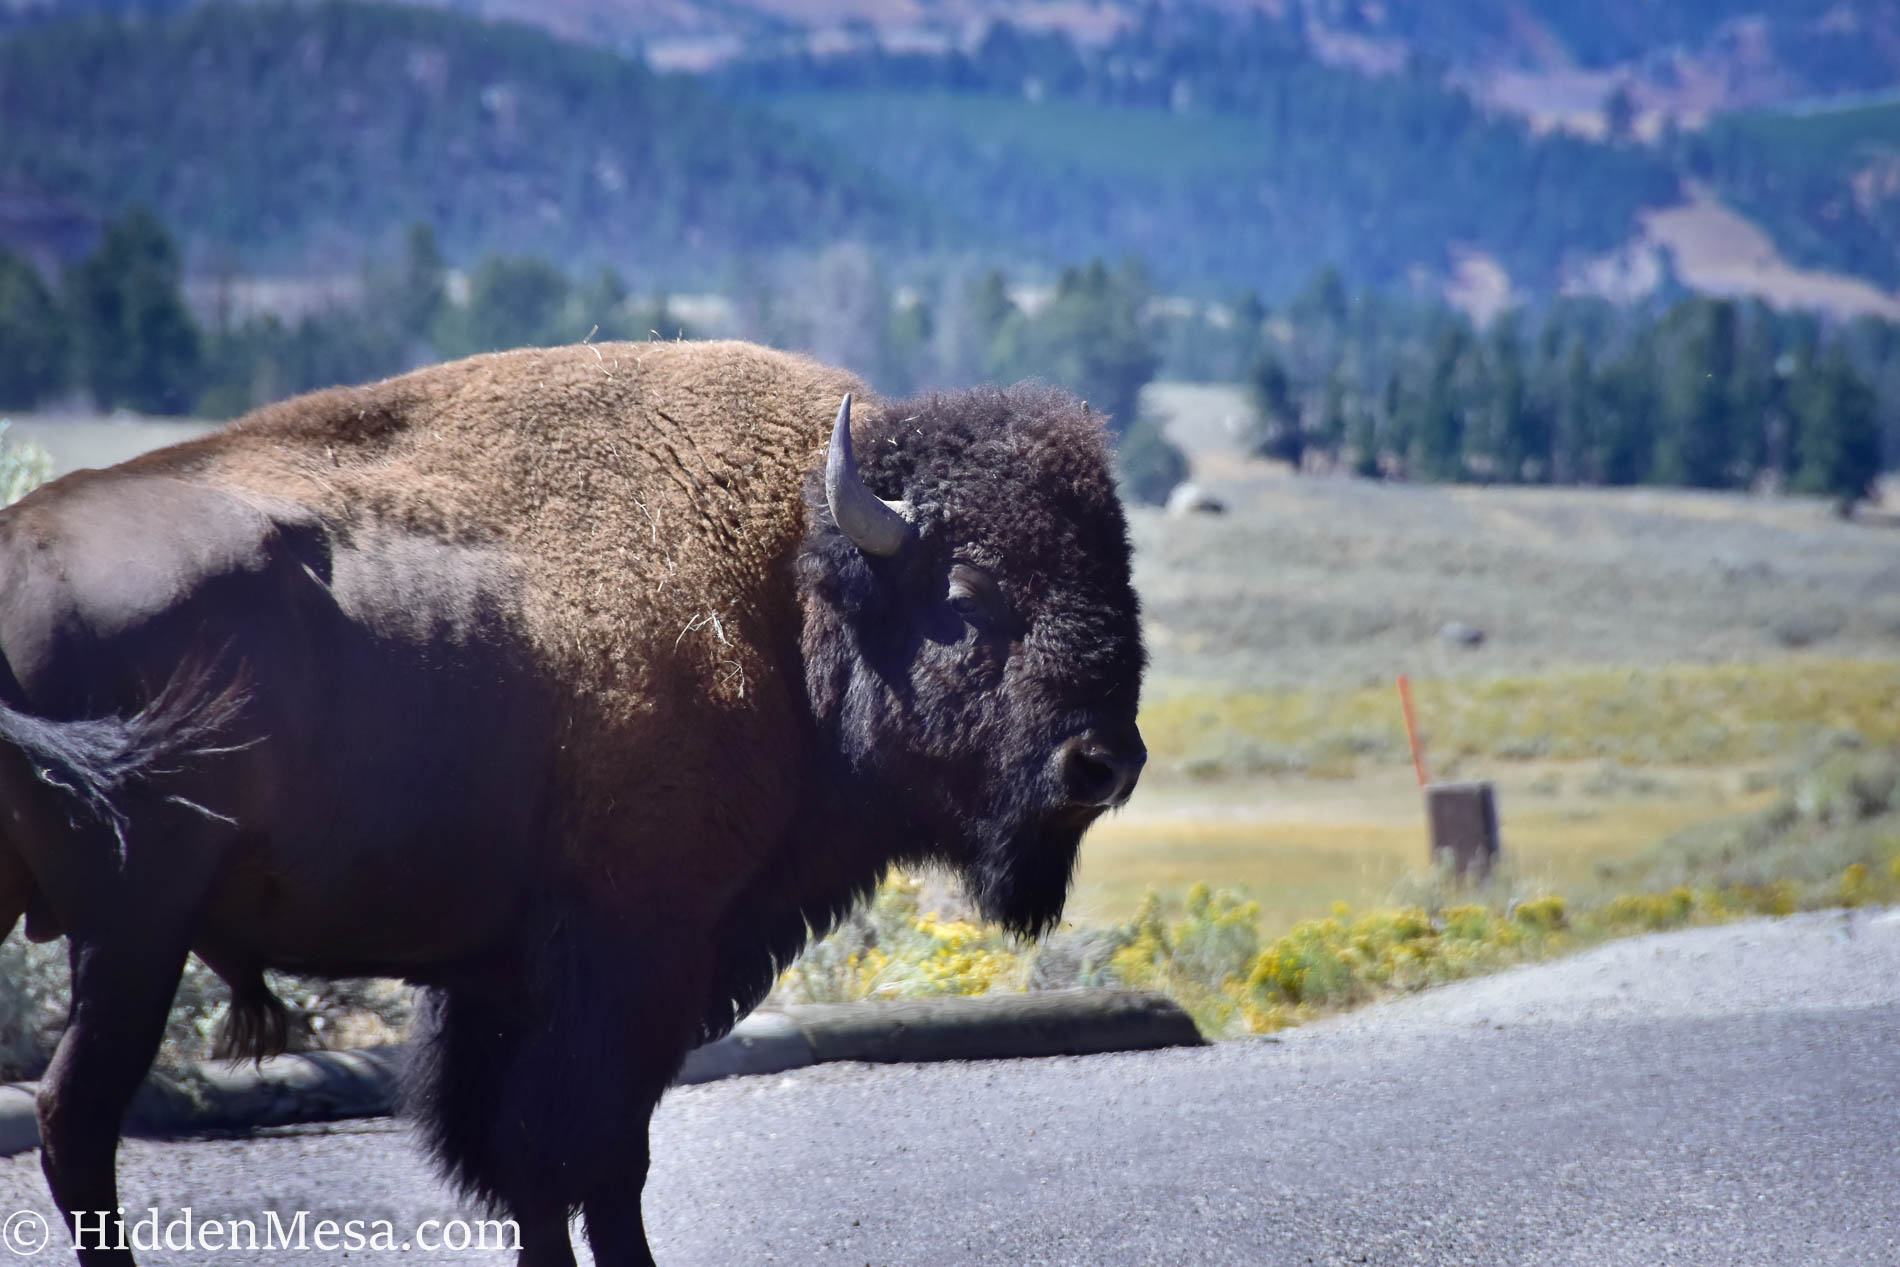 Seeing Yellowstone in a Quick Trip